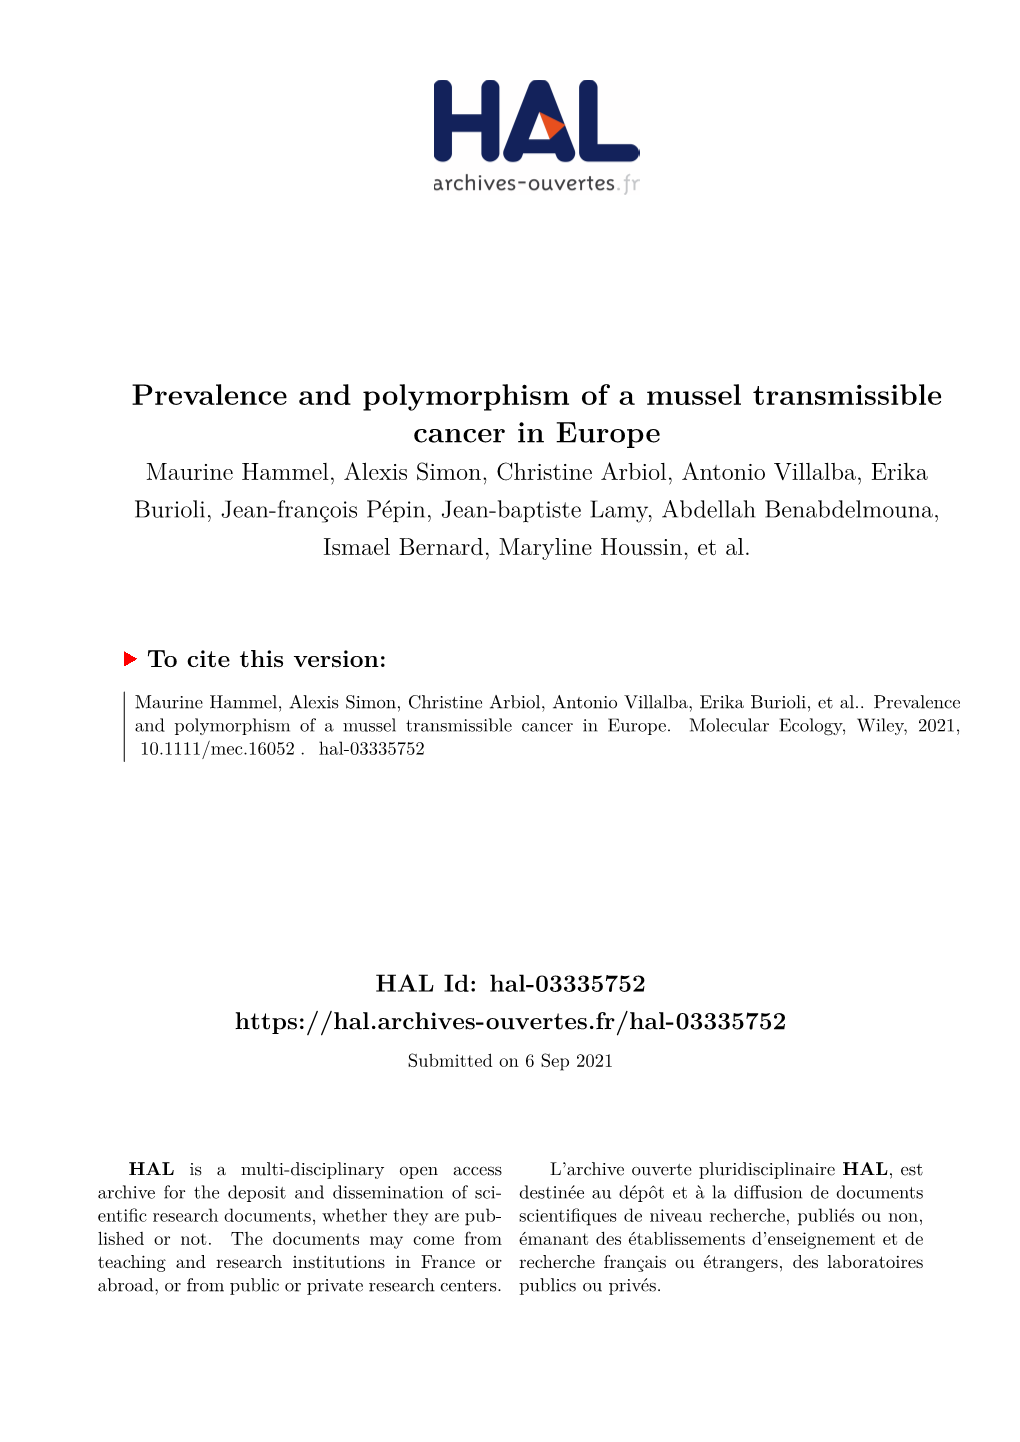 Prevalence and Polymorphism of a Mussel Transmissible Cancer In